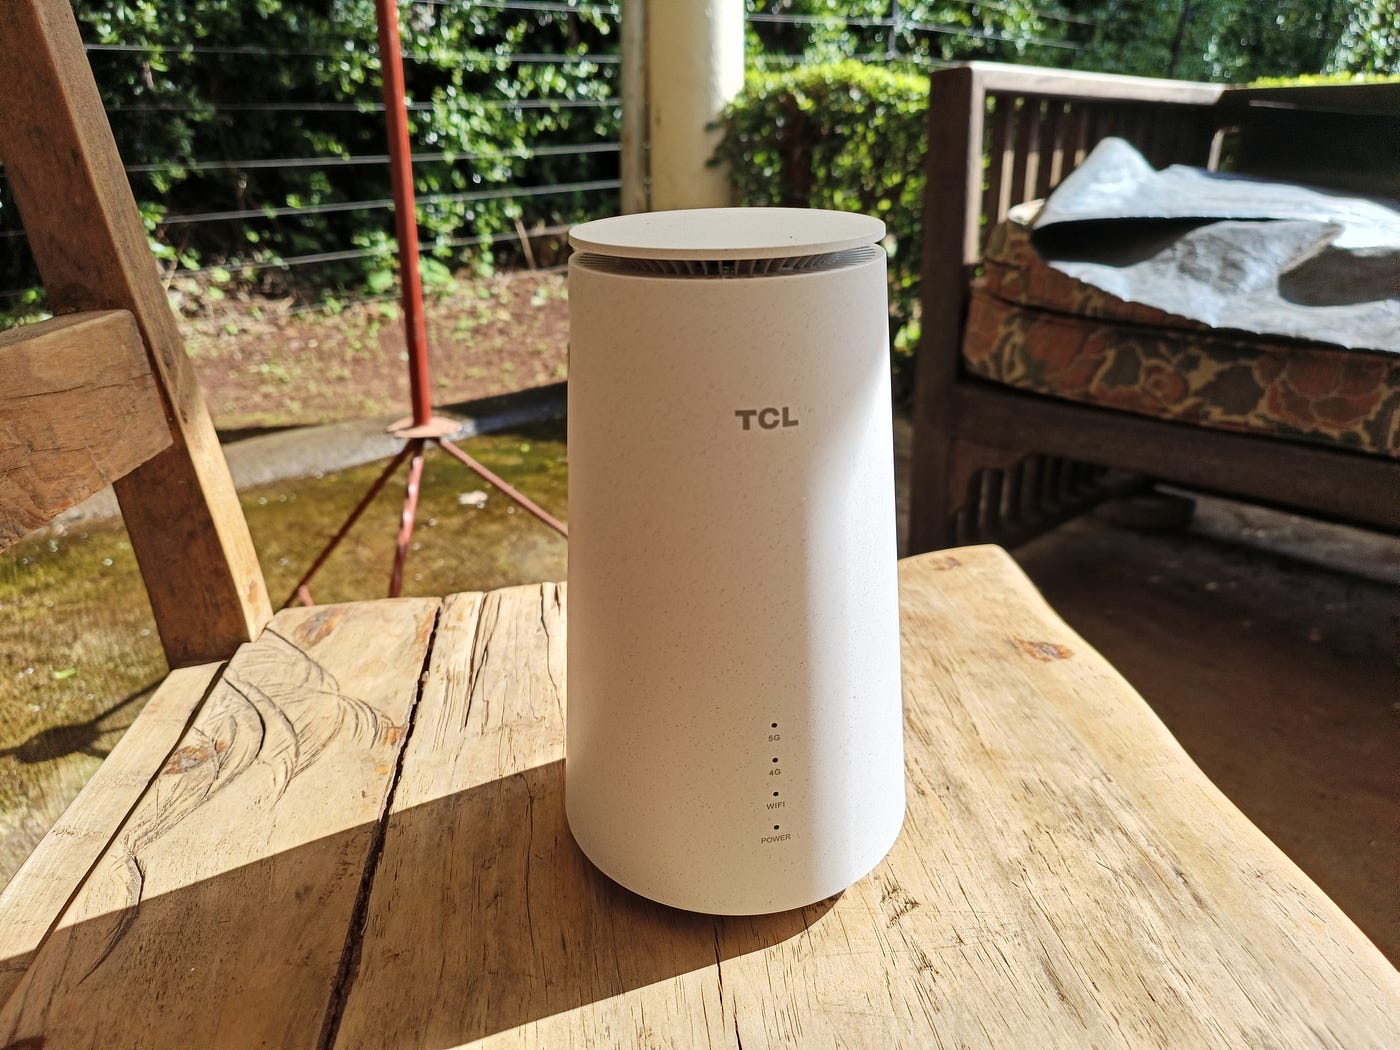 A Review Of The TCL LinkHub 5G Wi-Fi Router On Safaricom 5G In